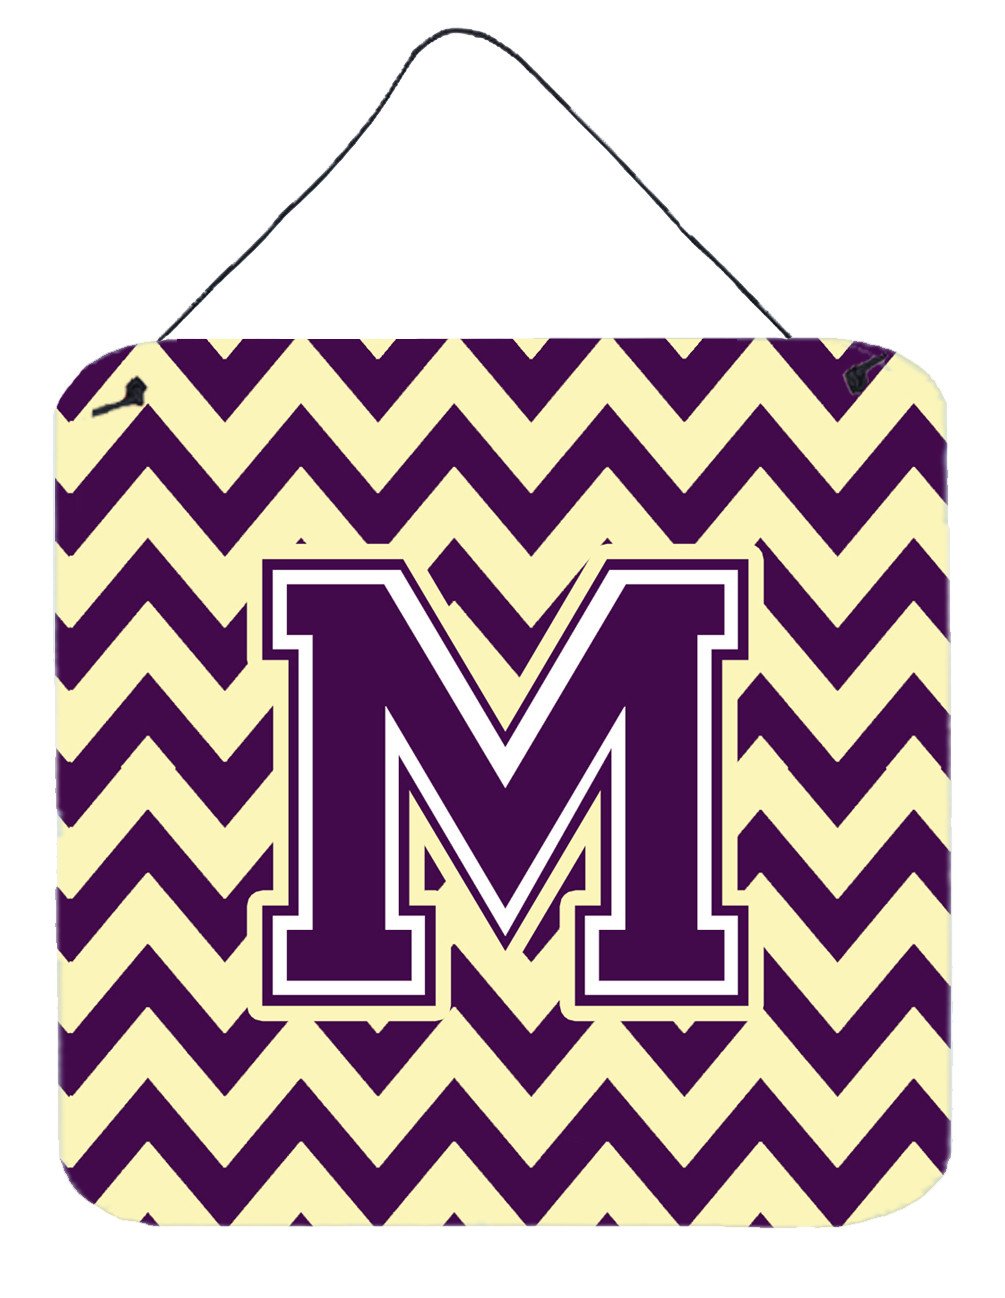 Letter M Chevron Purple and Gold Wall or Door Hanging Prints CJ1058-MDS66 by Caroline's Treasures